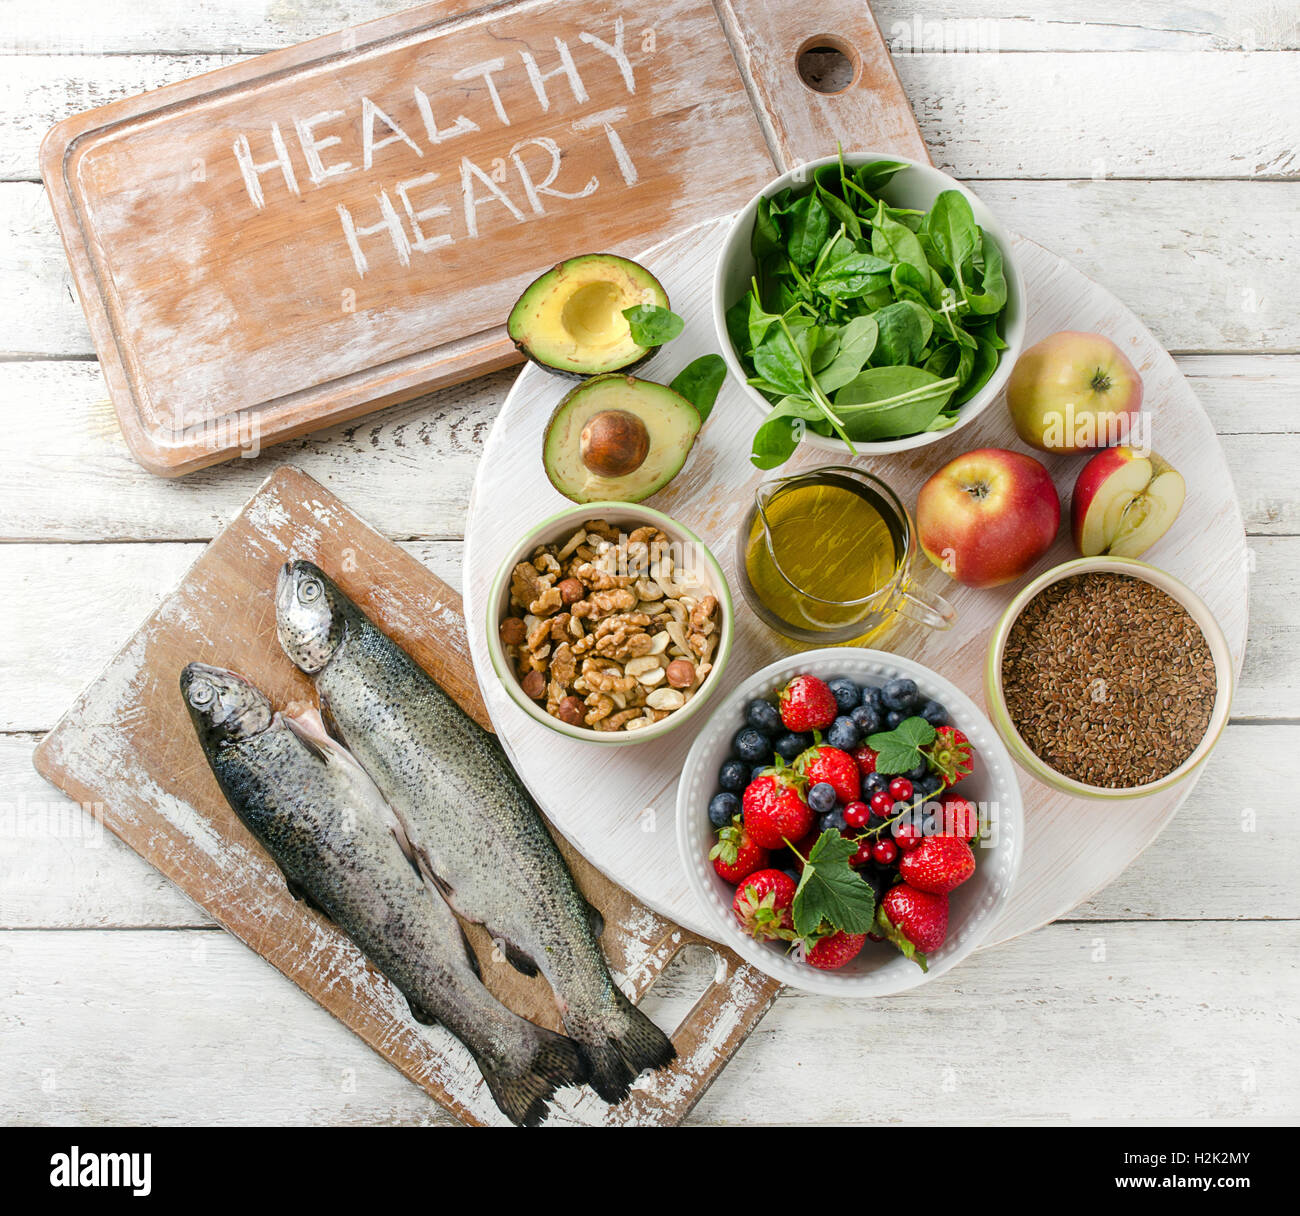 Food for healthy Heart. Heart-healthy diet.Top view Stock Photo